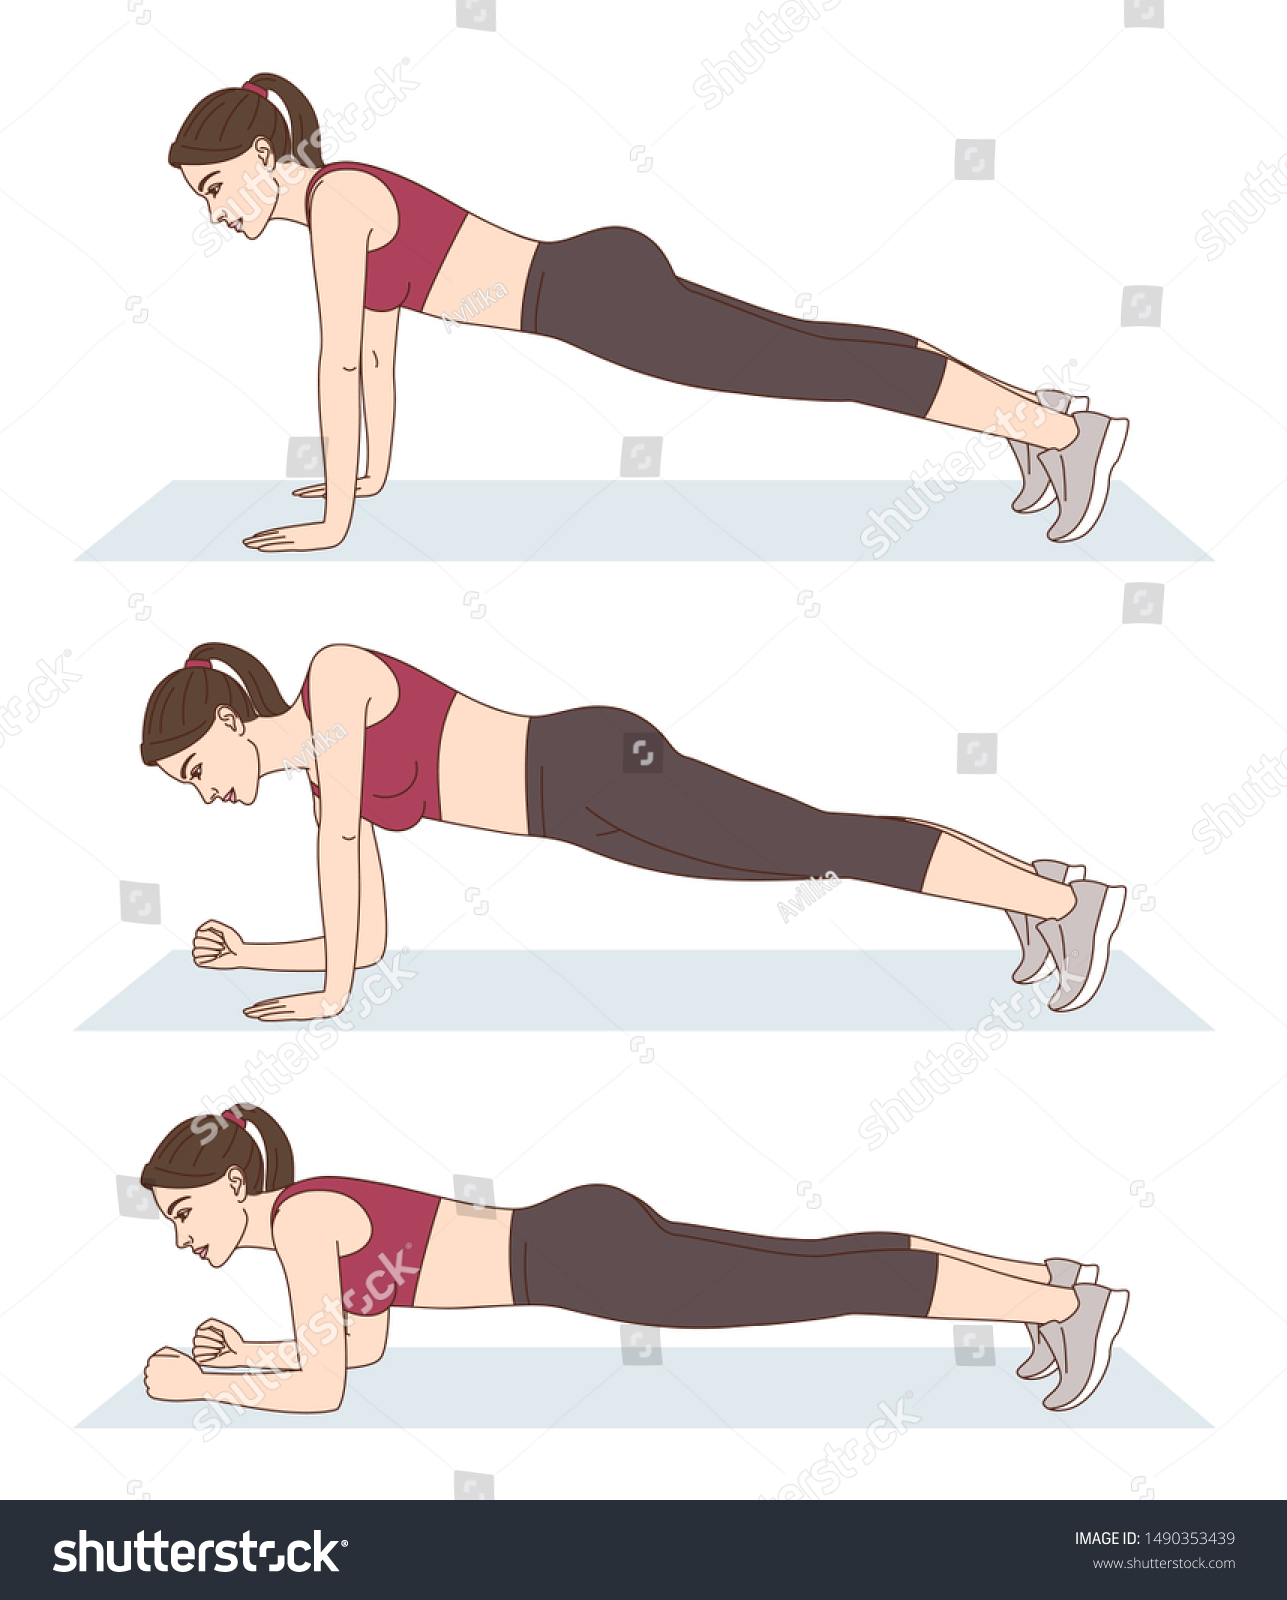 Woman Does Sports Exercises Down Planks Stock Illustration